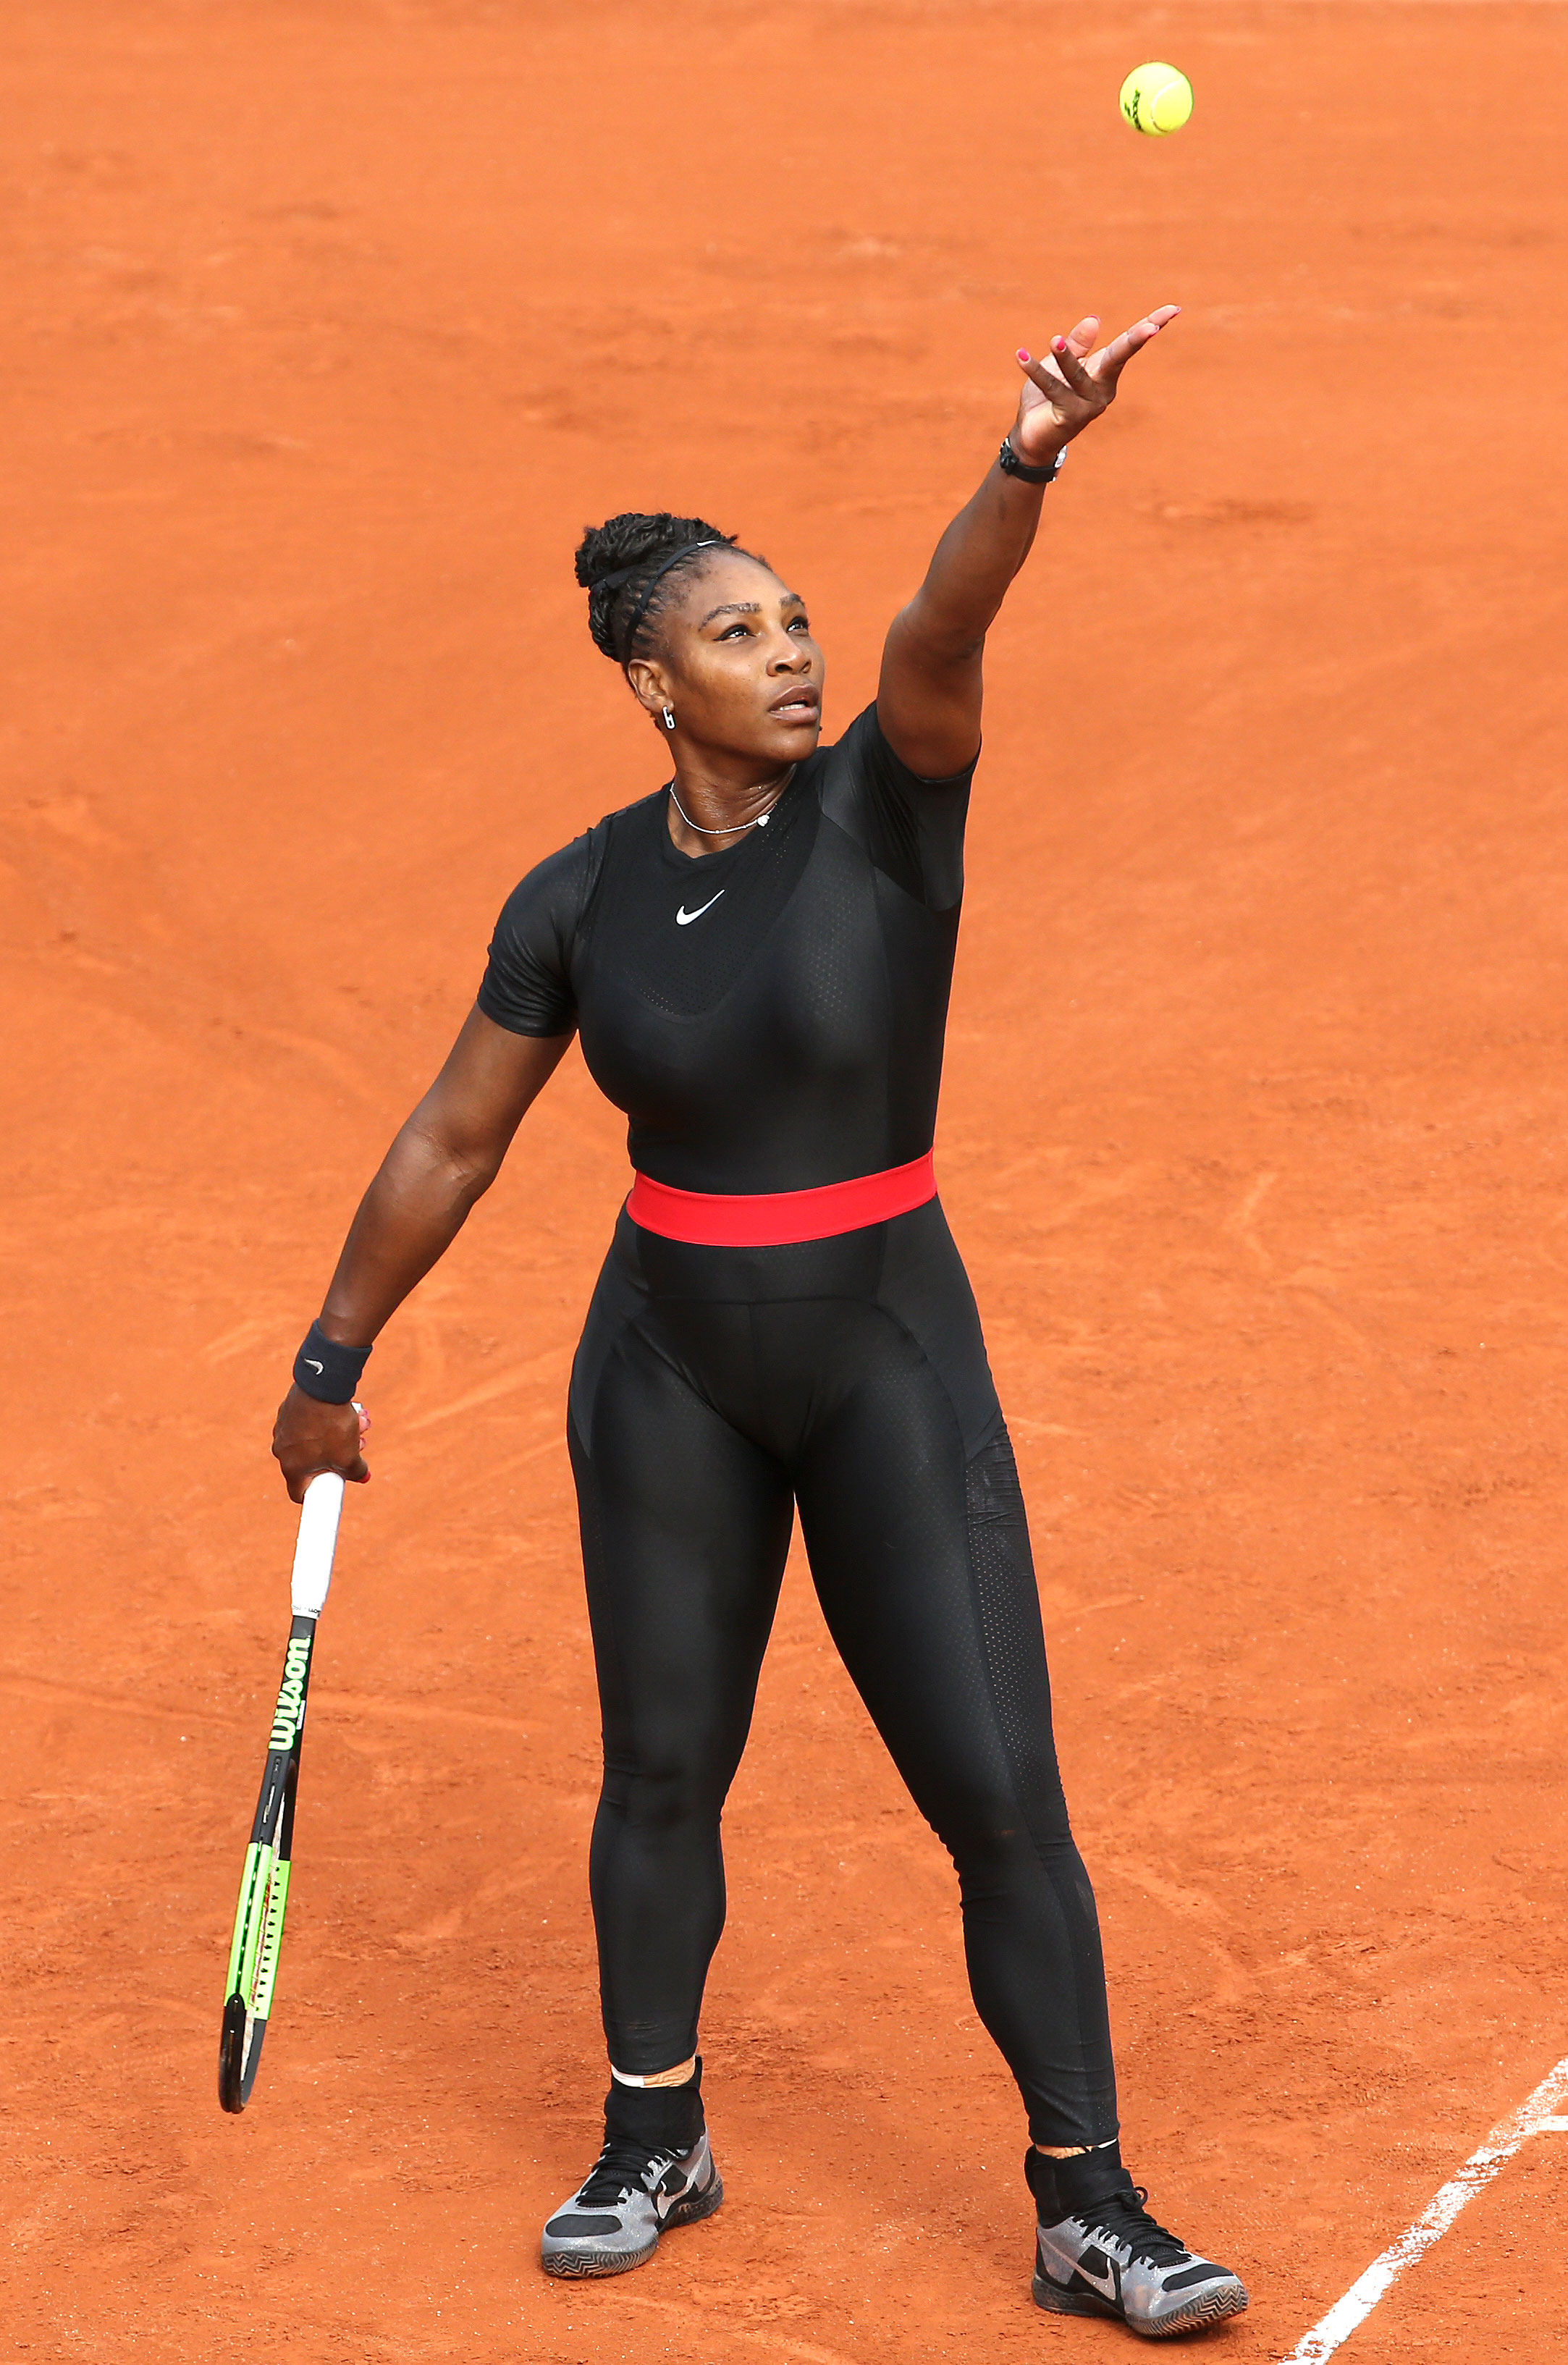 Serena Williams Wears Inspiring Catsuit at 2018 French Open: Pics